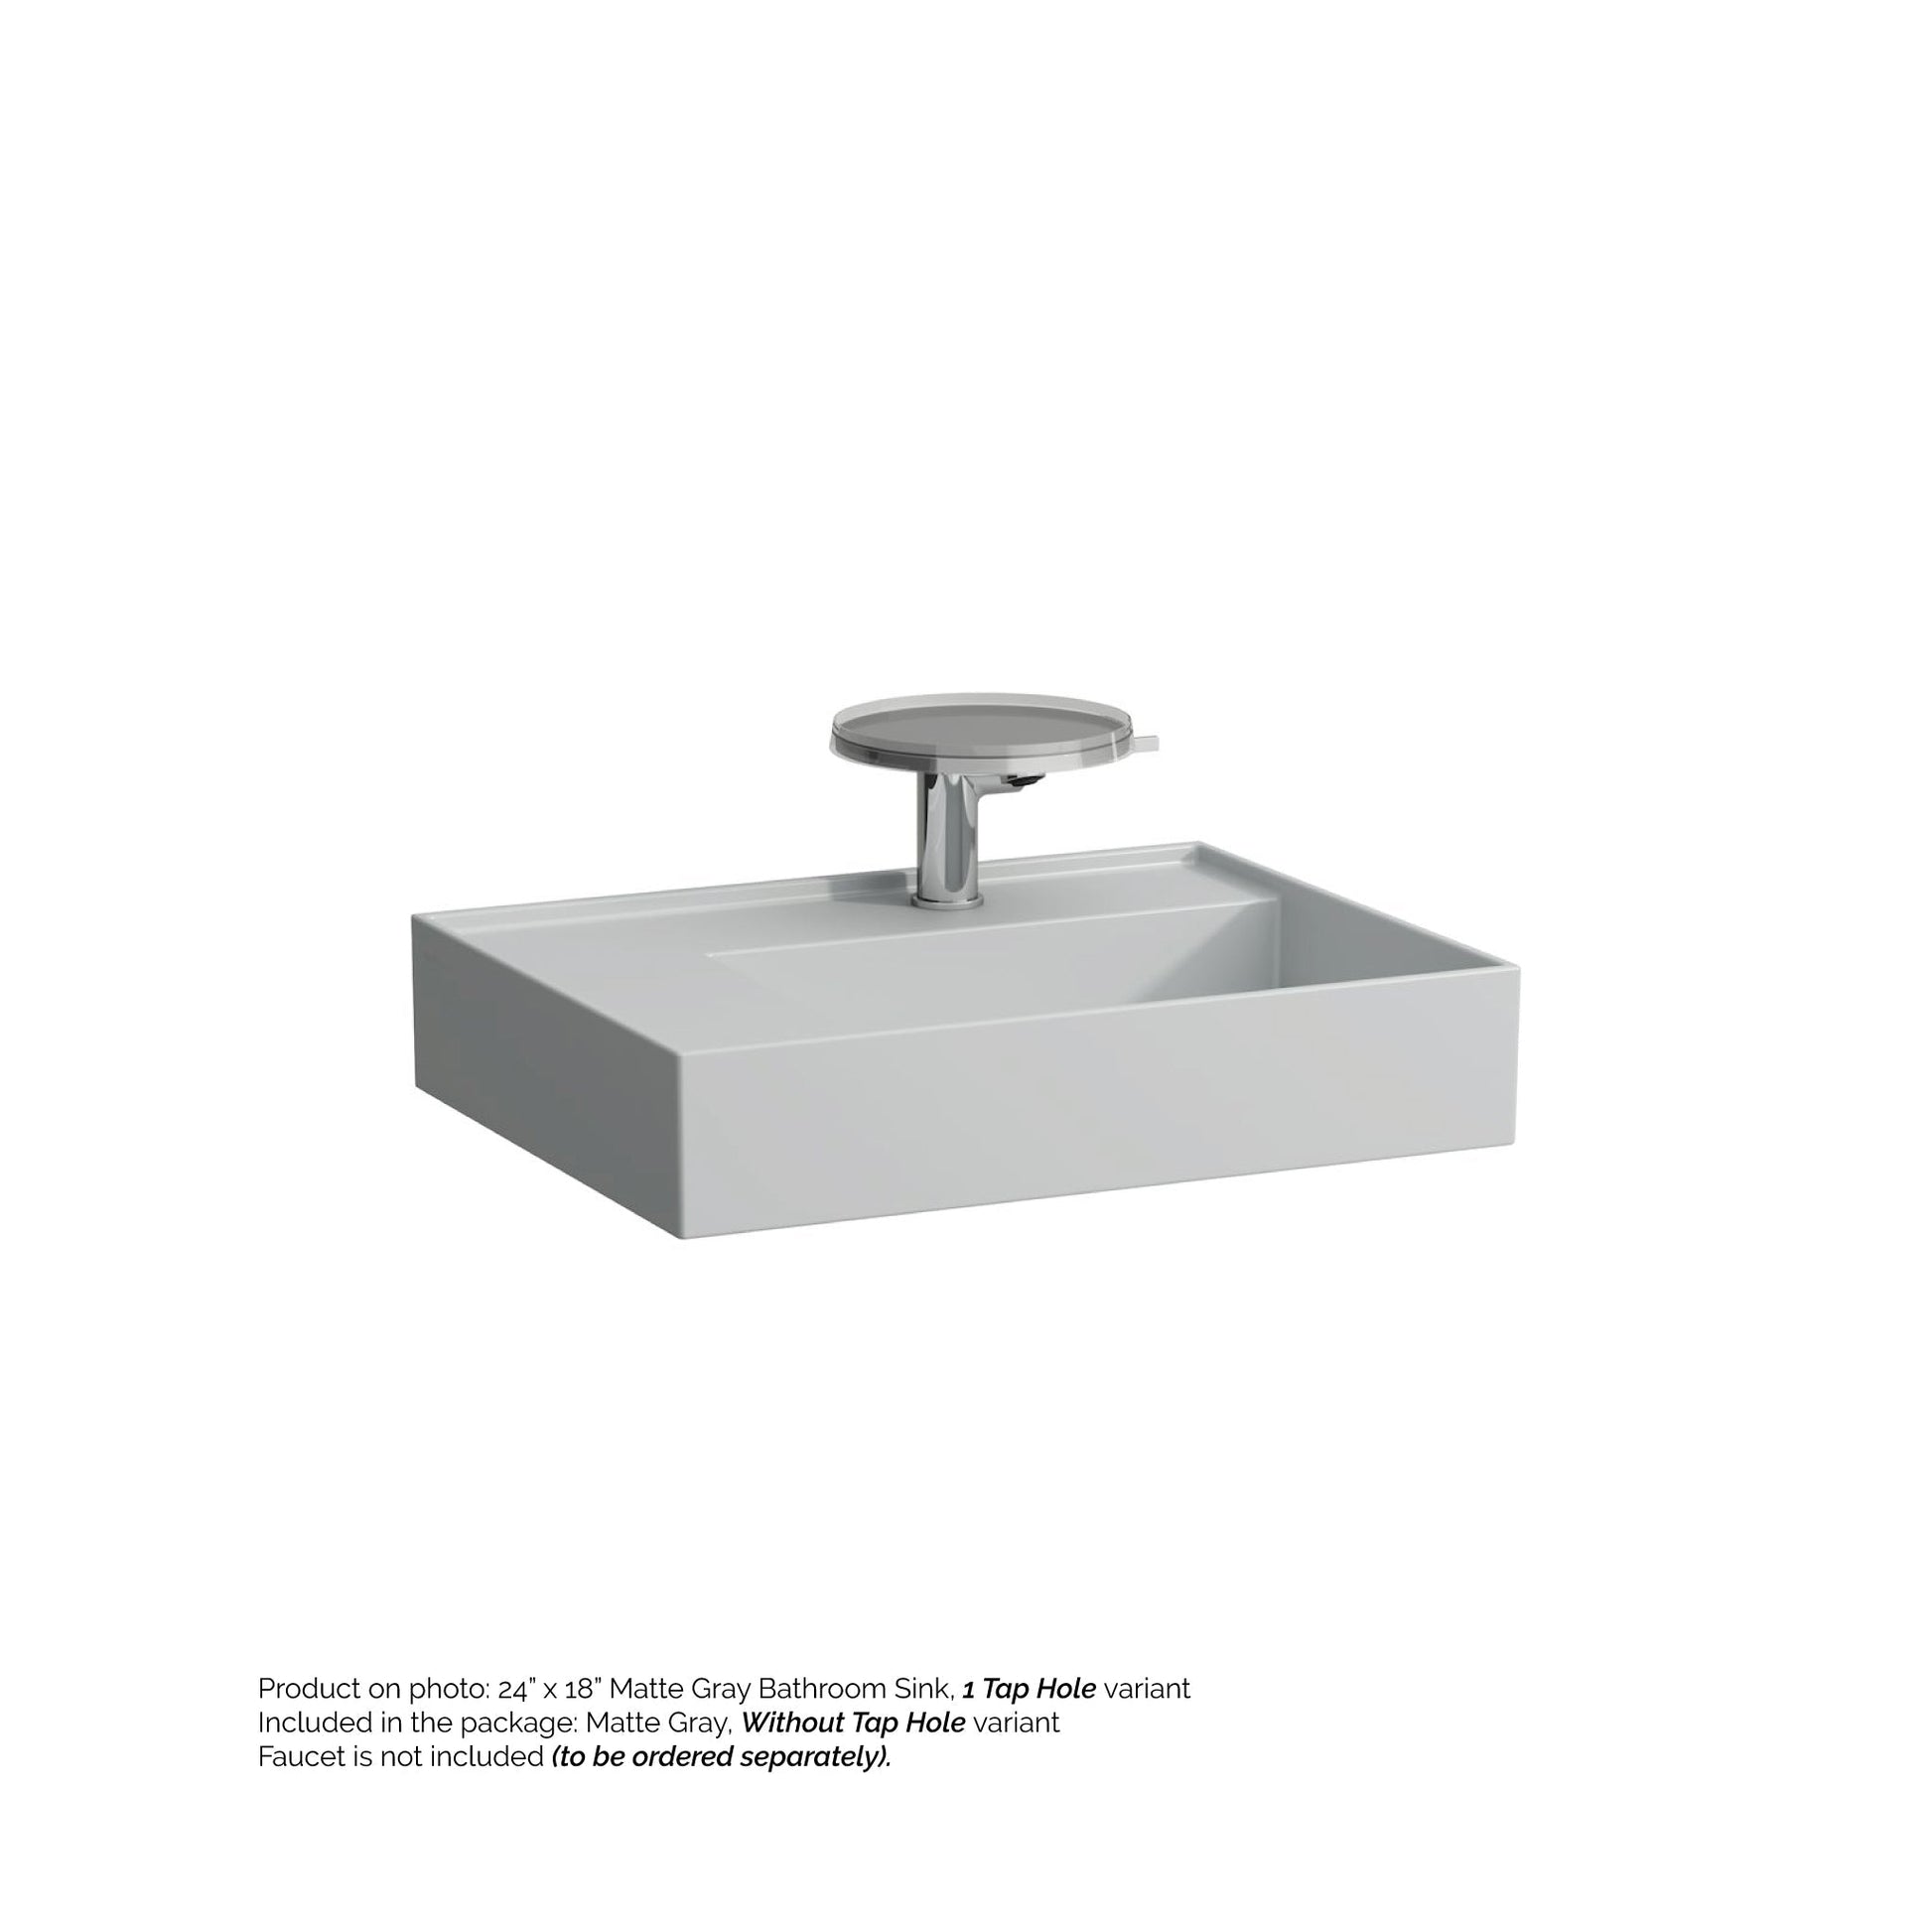 Laufen Kartell 24" x 18" Matte Gray Wall-Mounted Shelf-Left Bathroom Sink Without Faucet Hole